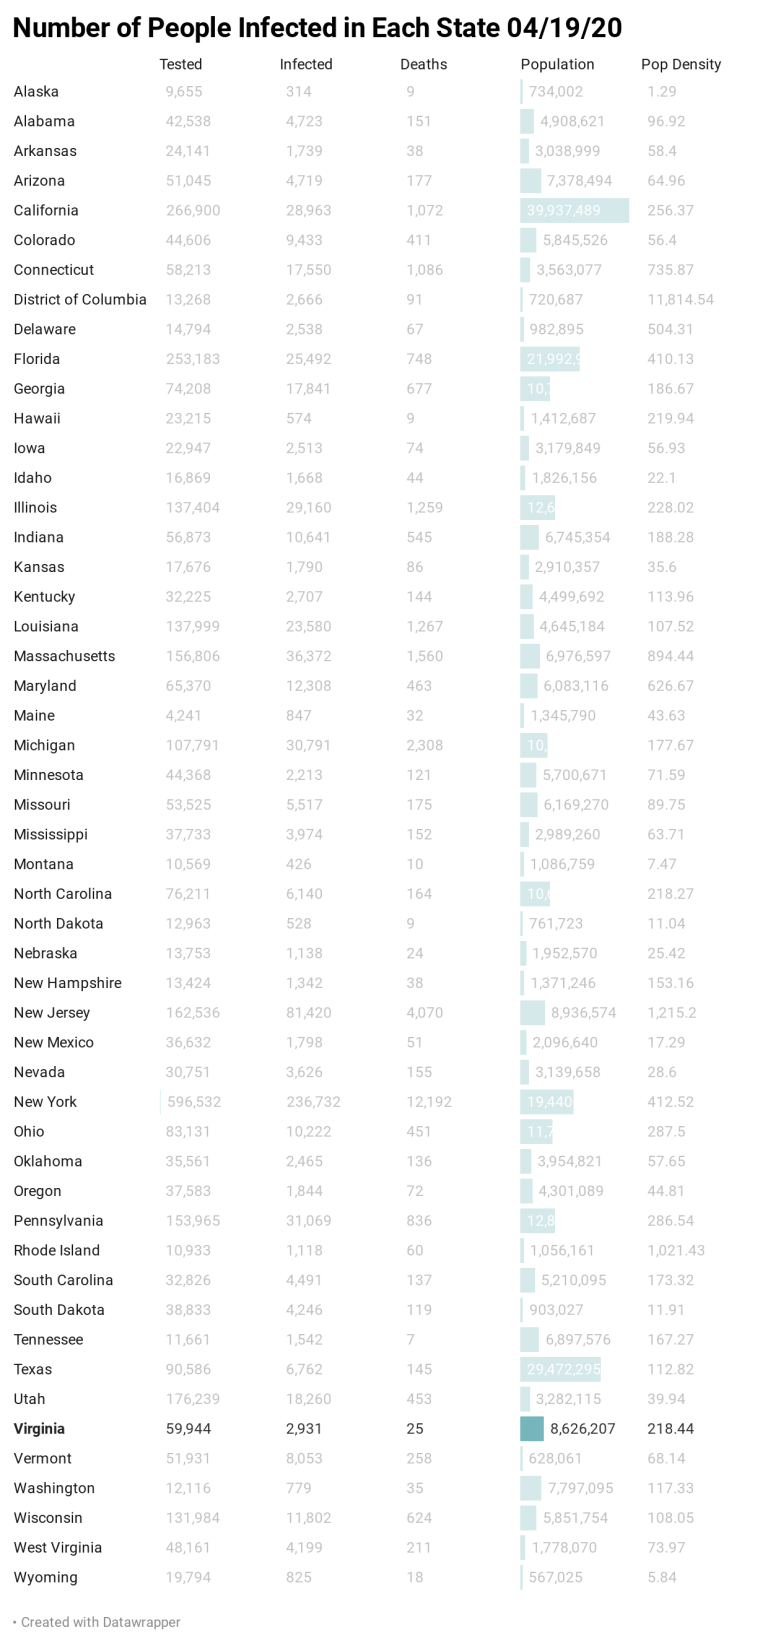 7H62j-number-of-people-infected-in-each-state-04-19-20.png